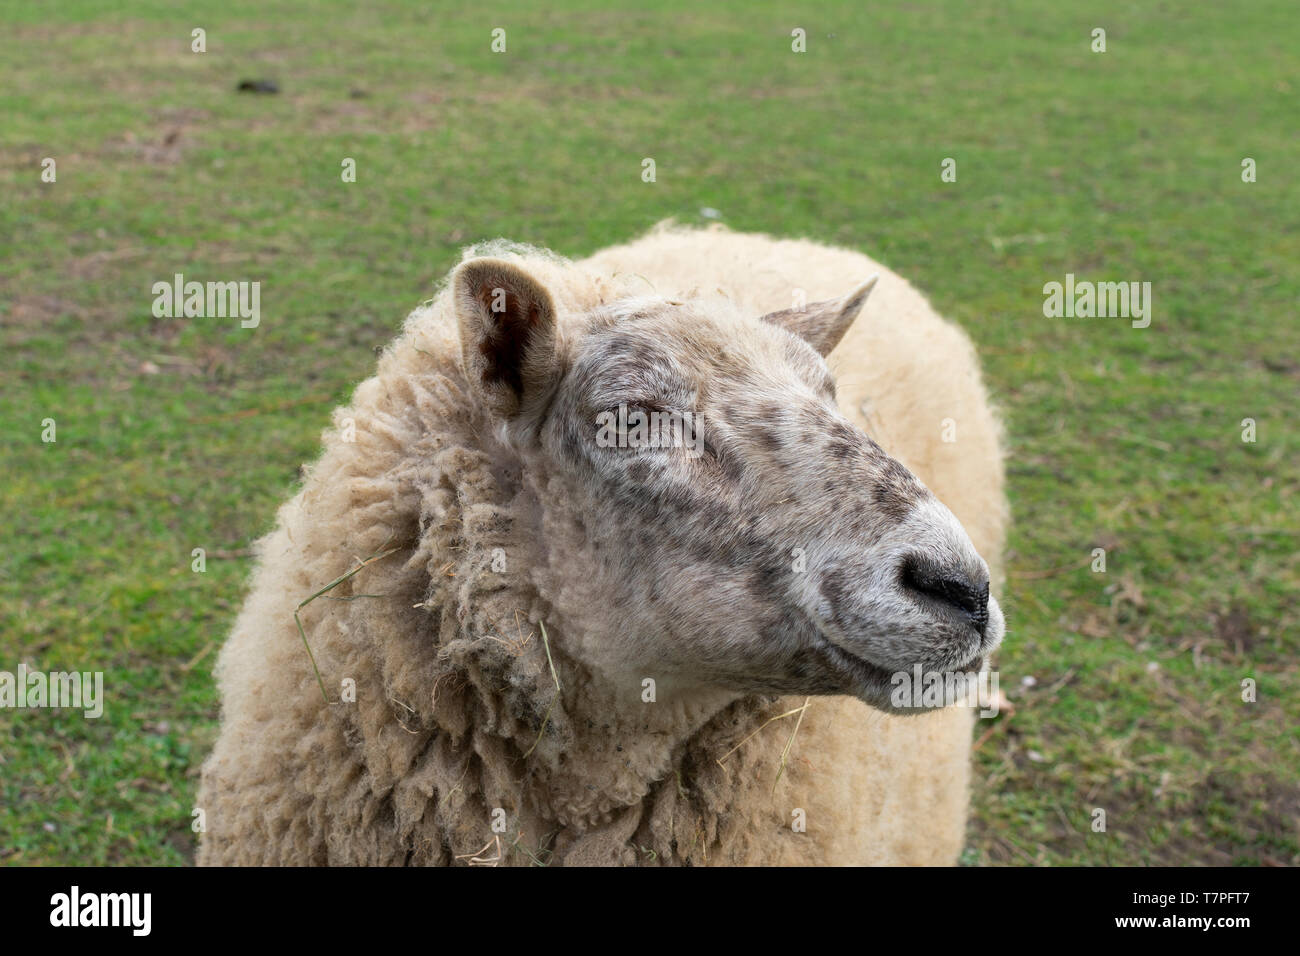 It's spring! Adult sheep comes take a look Stock Photo